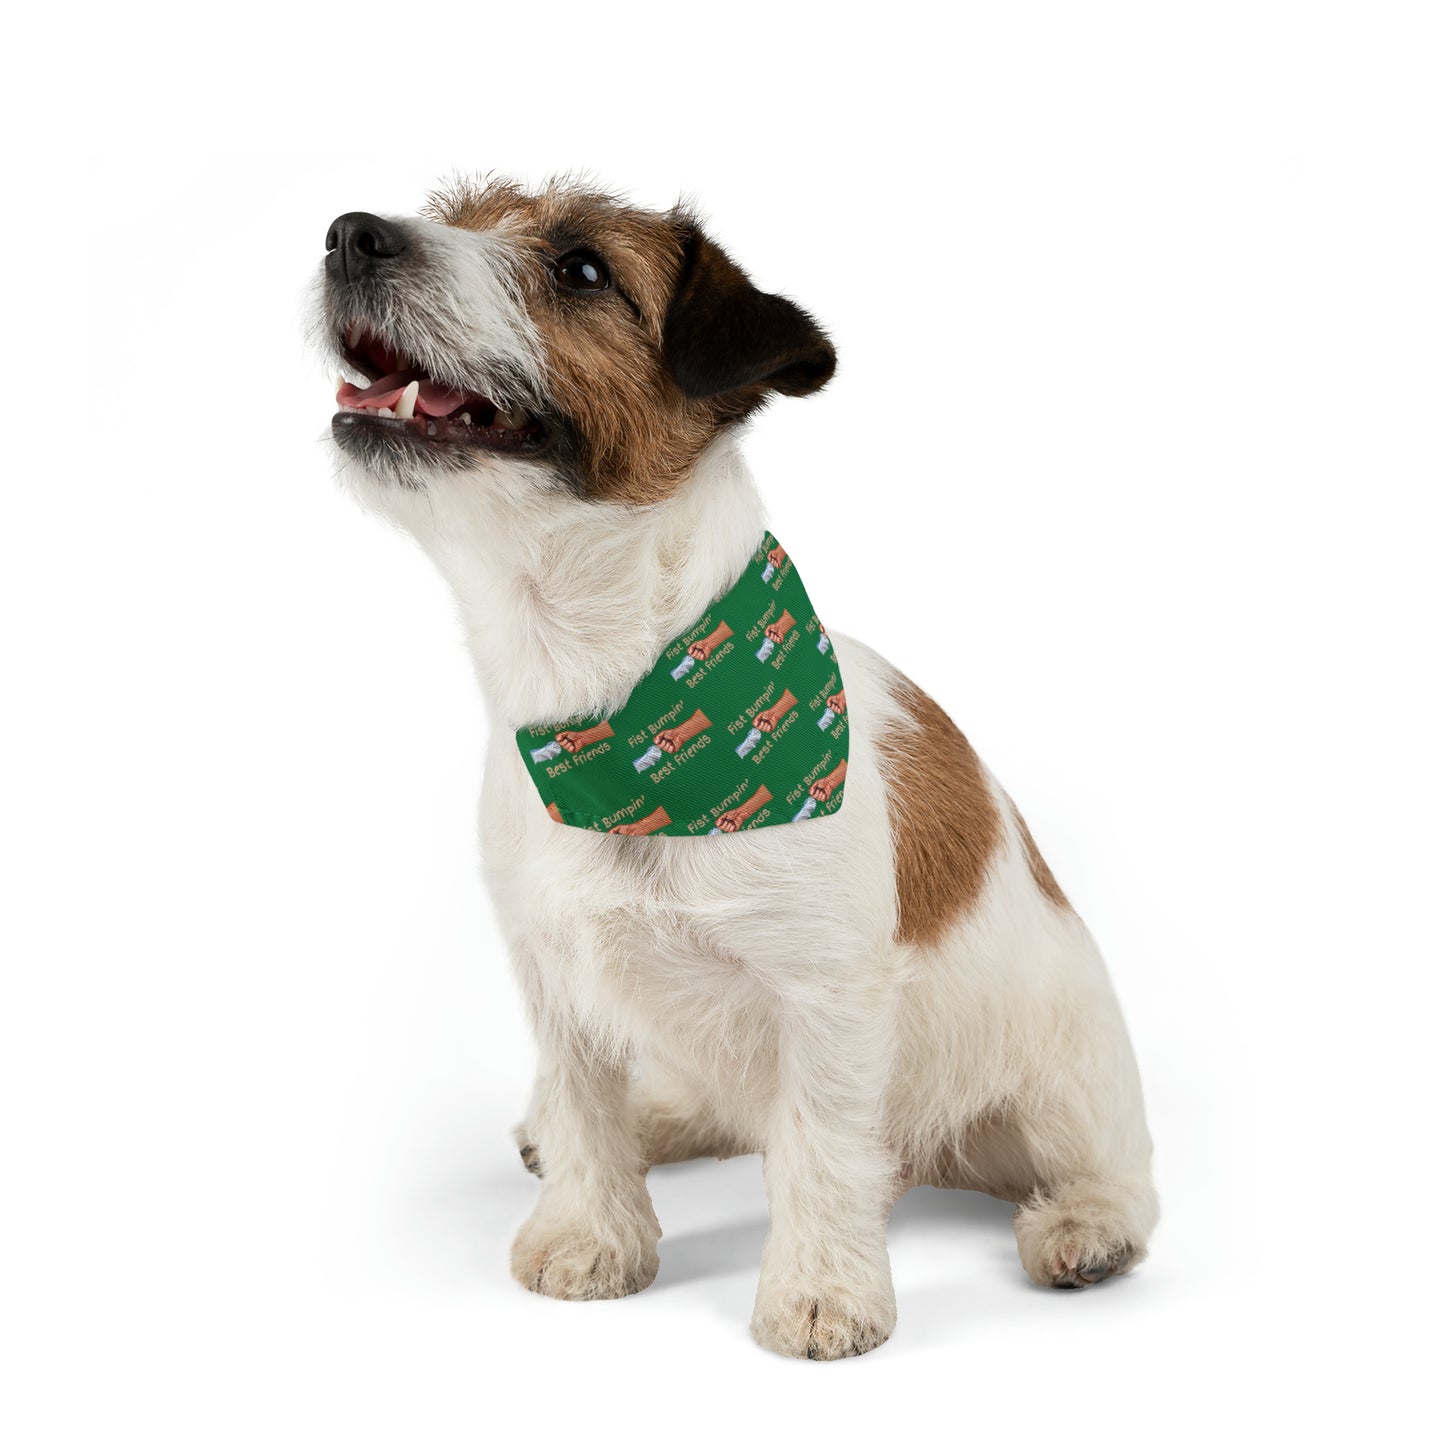 Fist Bumpin’ Best Friends Opie’s Cavalier King Charles Spaniel Pet Bandana Collar Green with Tan lettering.